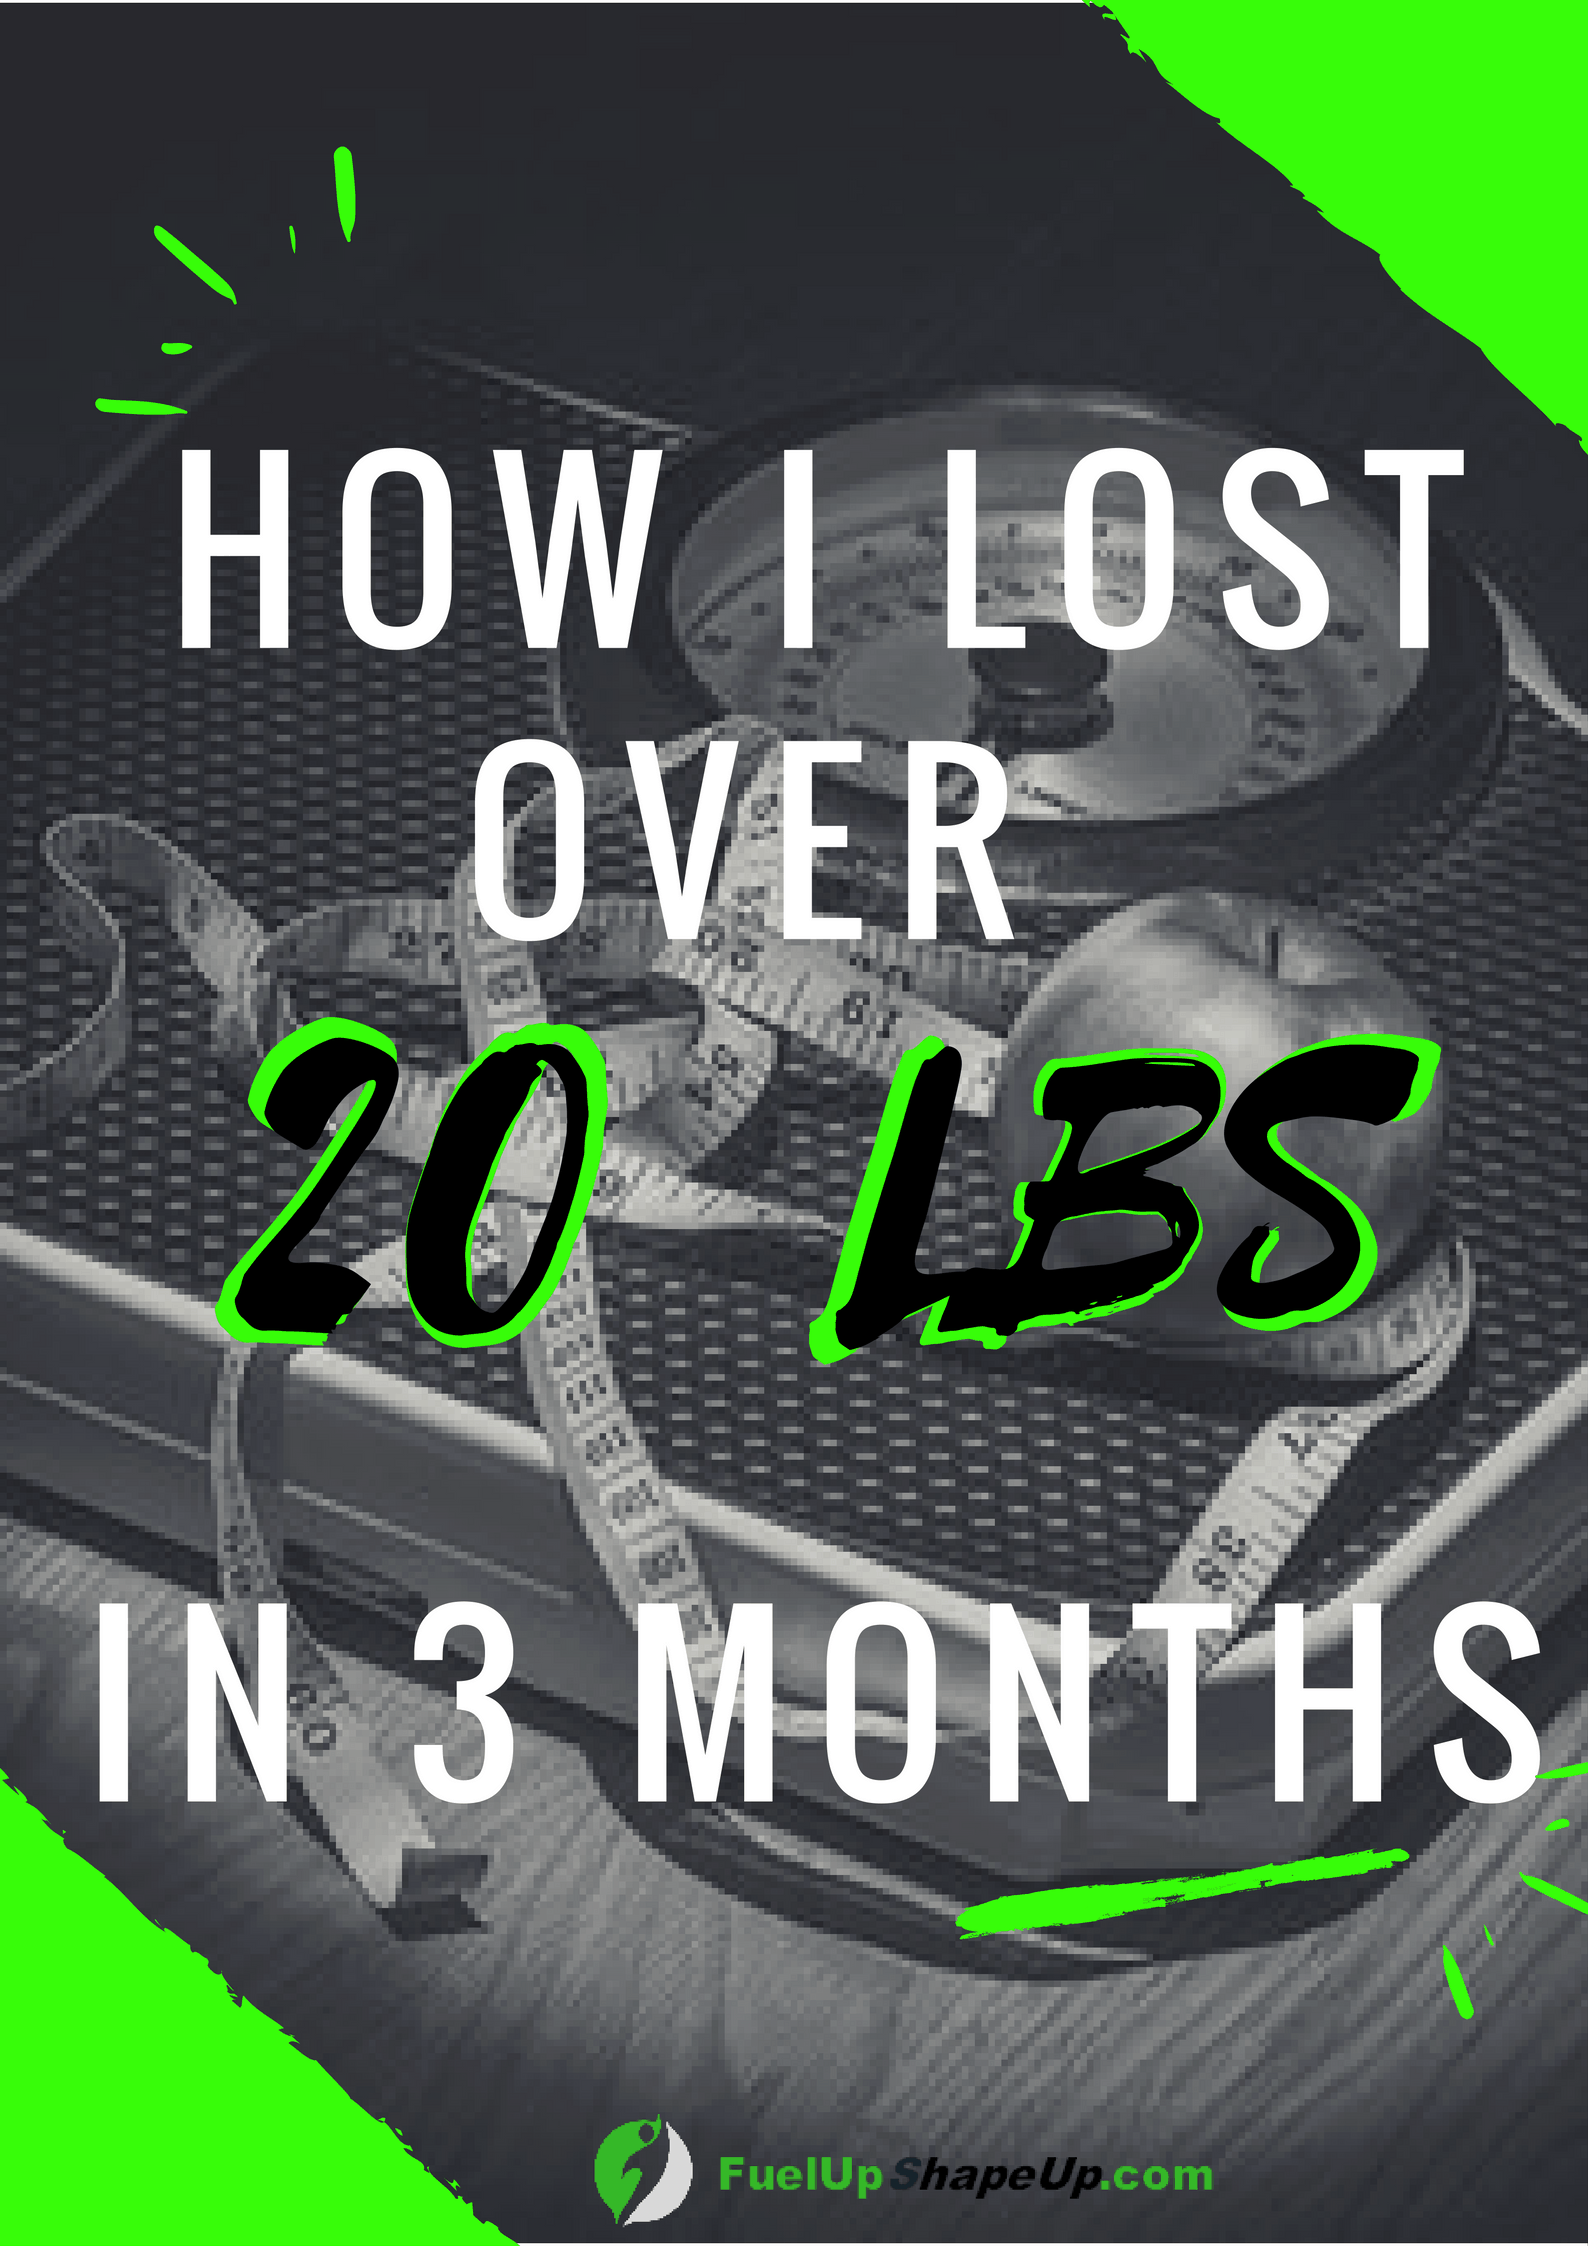 My Intermittent Fasting Journey- How I Lost Over 20 Lbs in 3 Months!